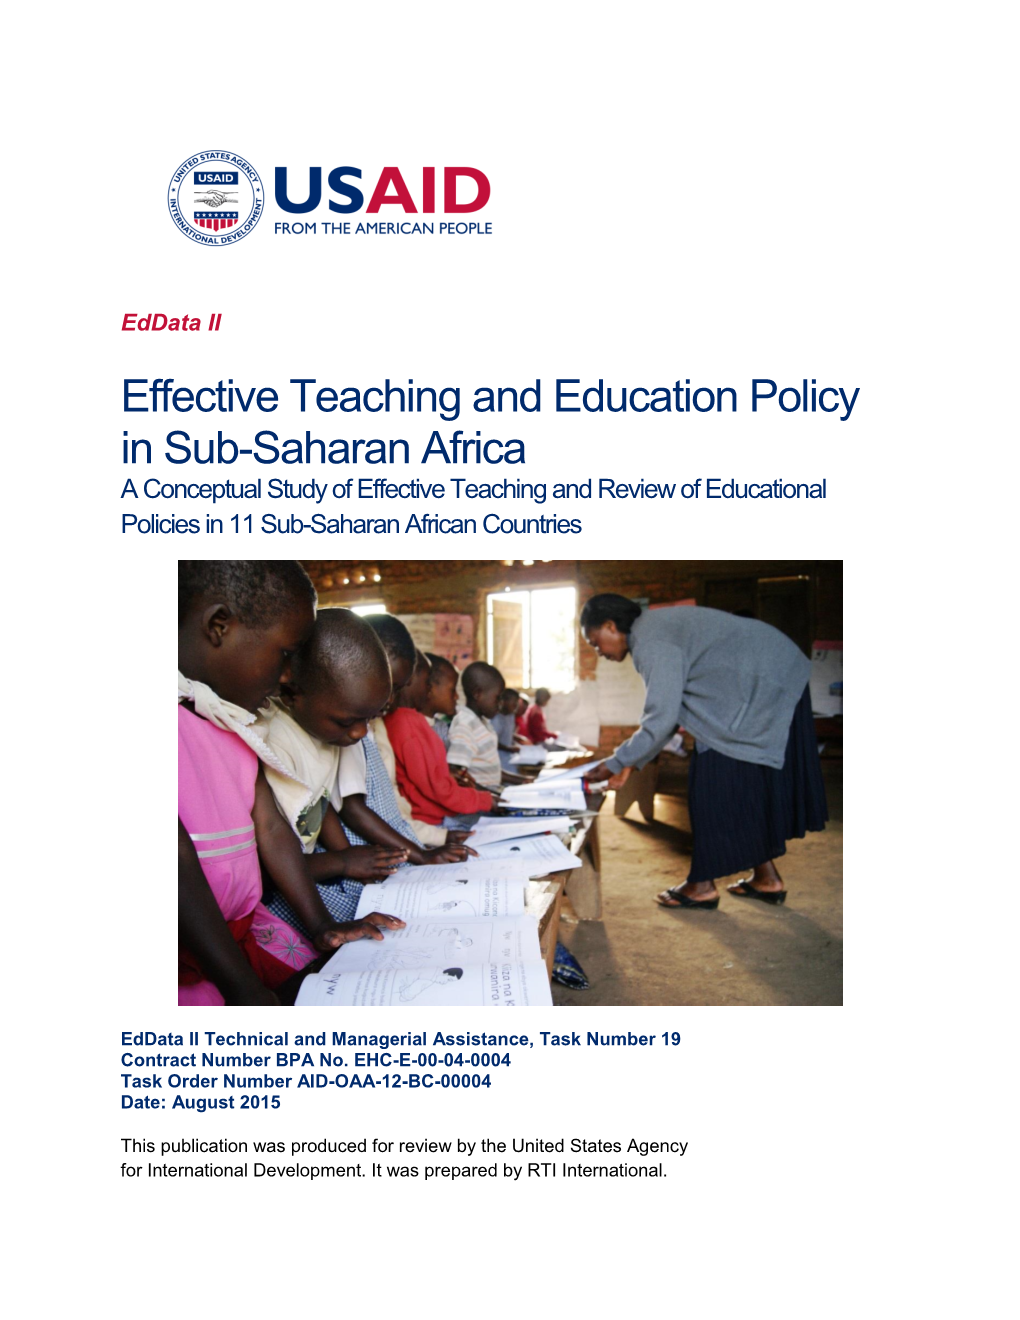 Effective Teaching and Education Policy in Sub-Saharan Africa